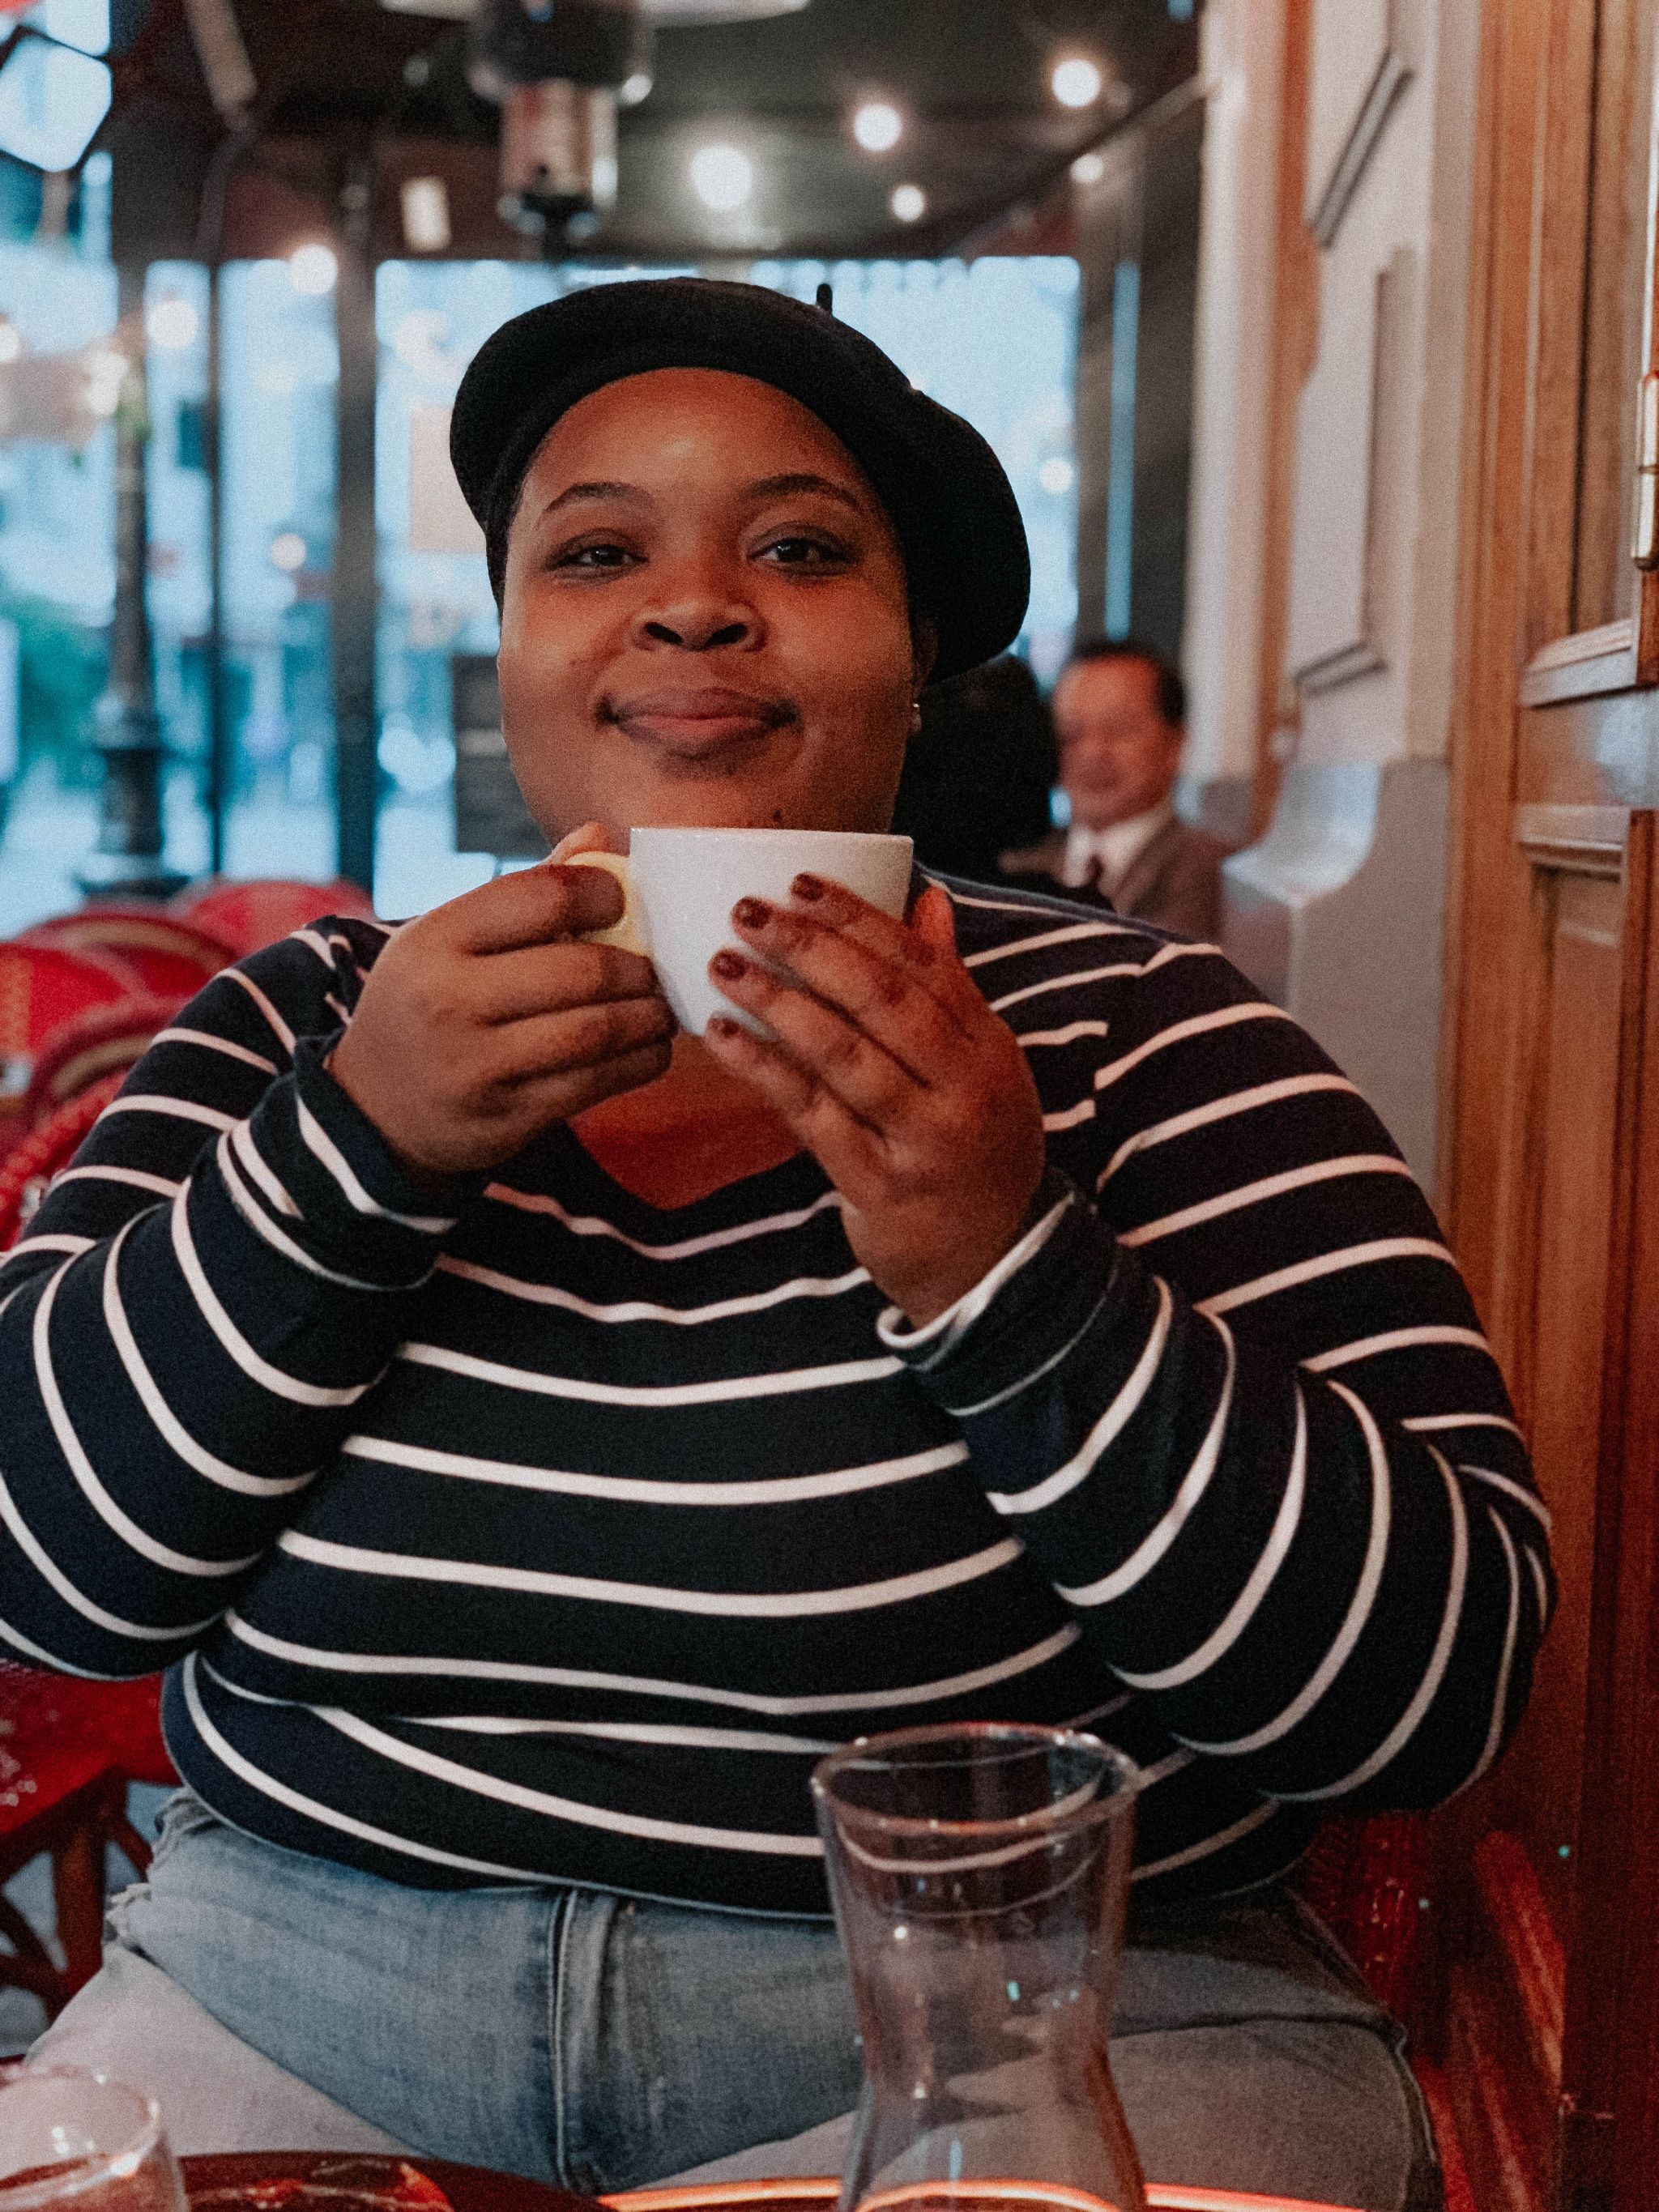 The Coffee Shops I Tried in Paris